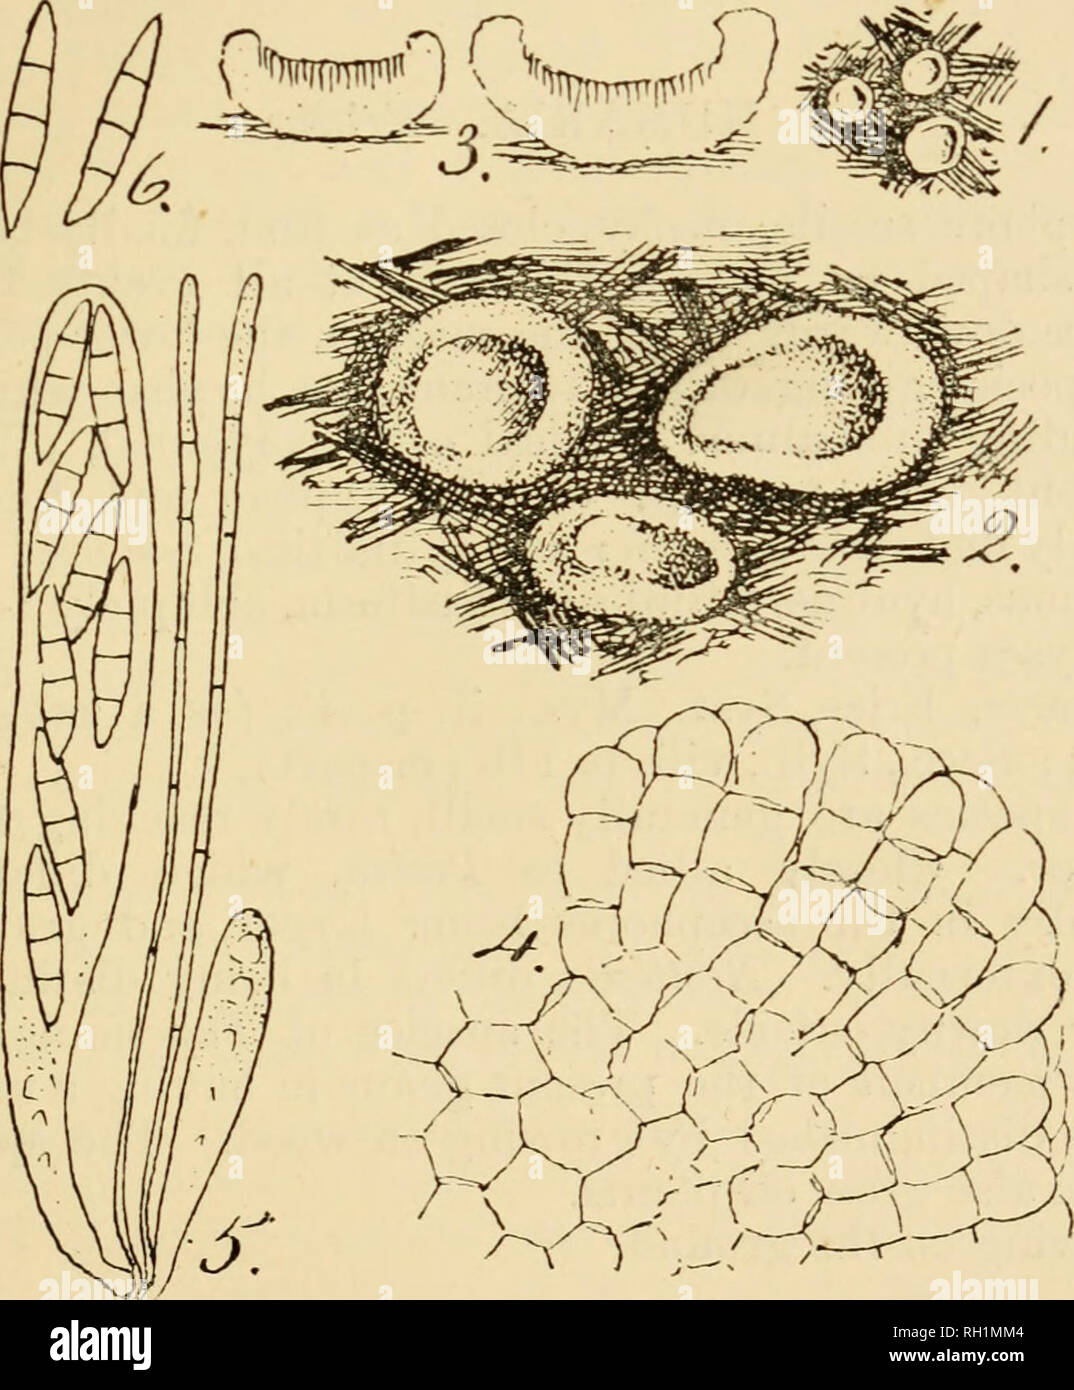 . British fungus-flora. A classified text-book of mycology. Fungi -- Great Britain. Masseea quisquilarum, Sacc.—Fig. 1, nat. size;—Fig. 2, ascophores. slightly x ;—Fig. 3, sections of same, slightly x ;—Fig. 4, portion of excipulum x 400 ;—Fig. 5, asci and paraphyses, x 400;—Fig. 6, free spores, x 500. chymatous, cells subquadrate or polygonal, 6-8 /x diameter, running out in more or less parallel series at the surface and margin ; asci broadly clavate, apex somewhat truncate, base narrowed into a slender pedicel, 8-spored; spores irregularly 2-seriate, hyaline, narrowly fusiform, straight or  Stock Photo